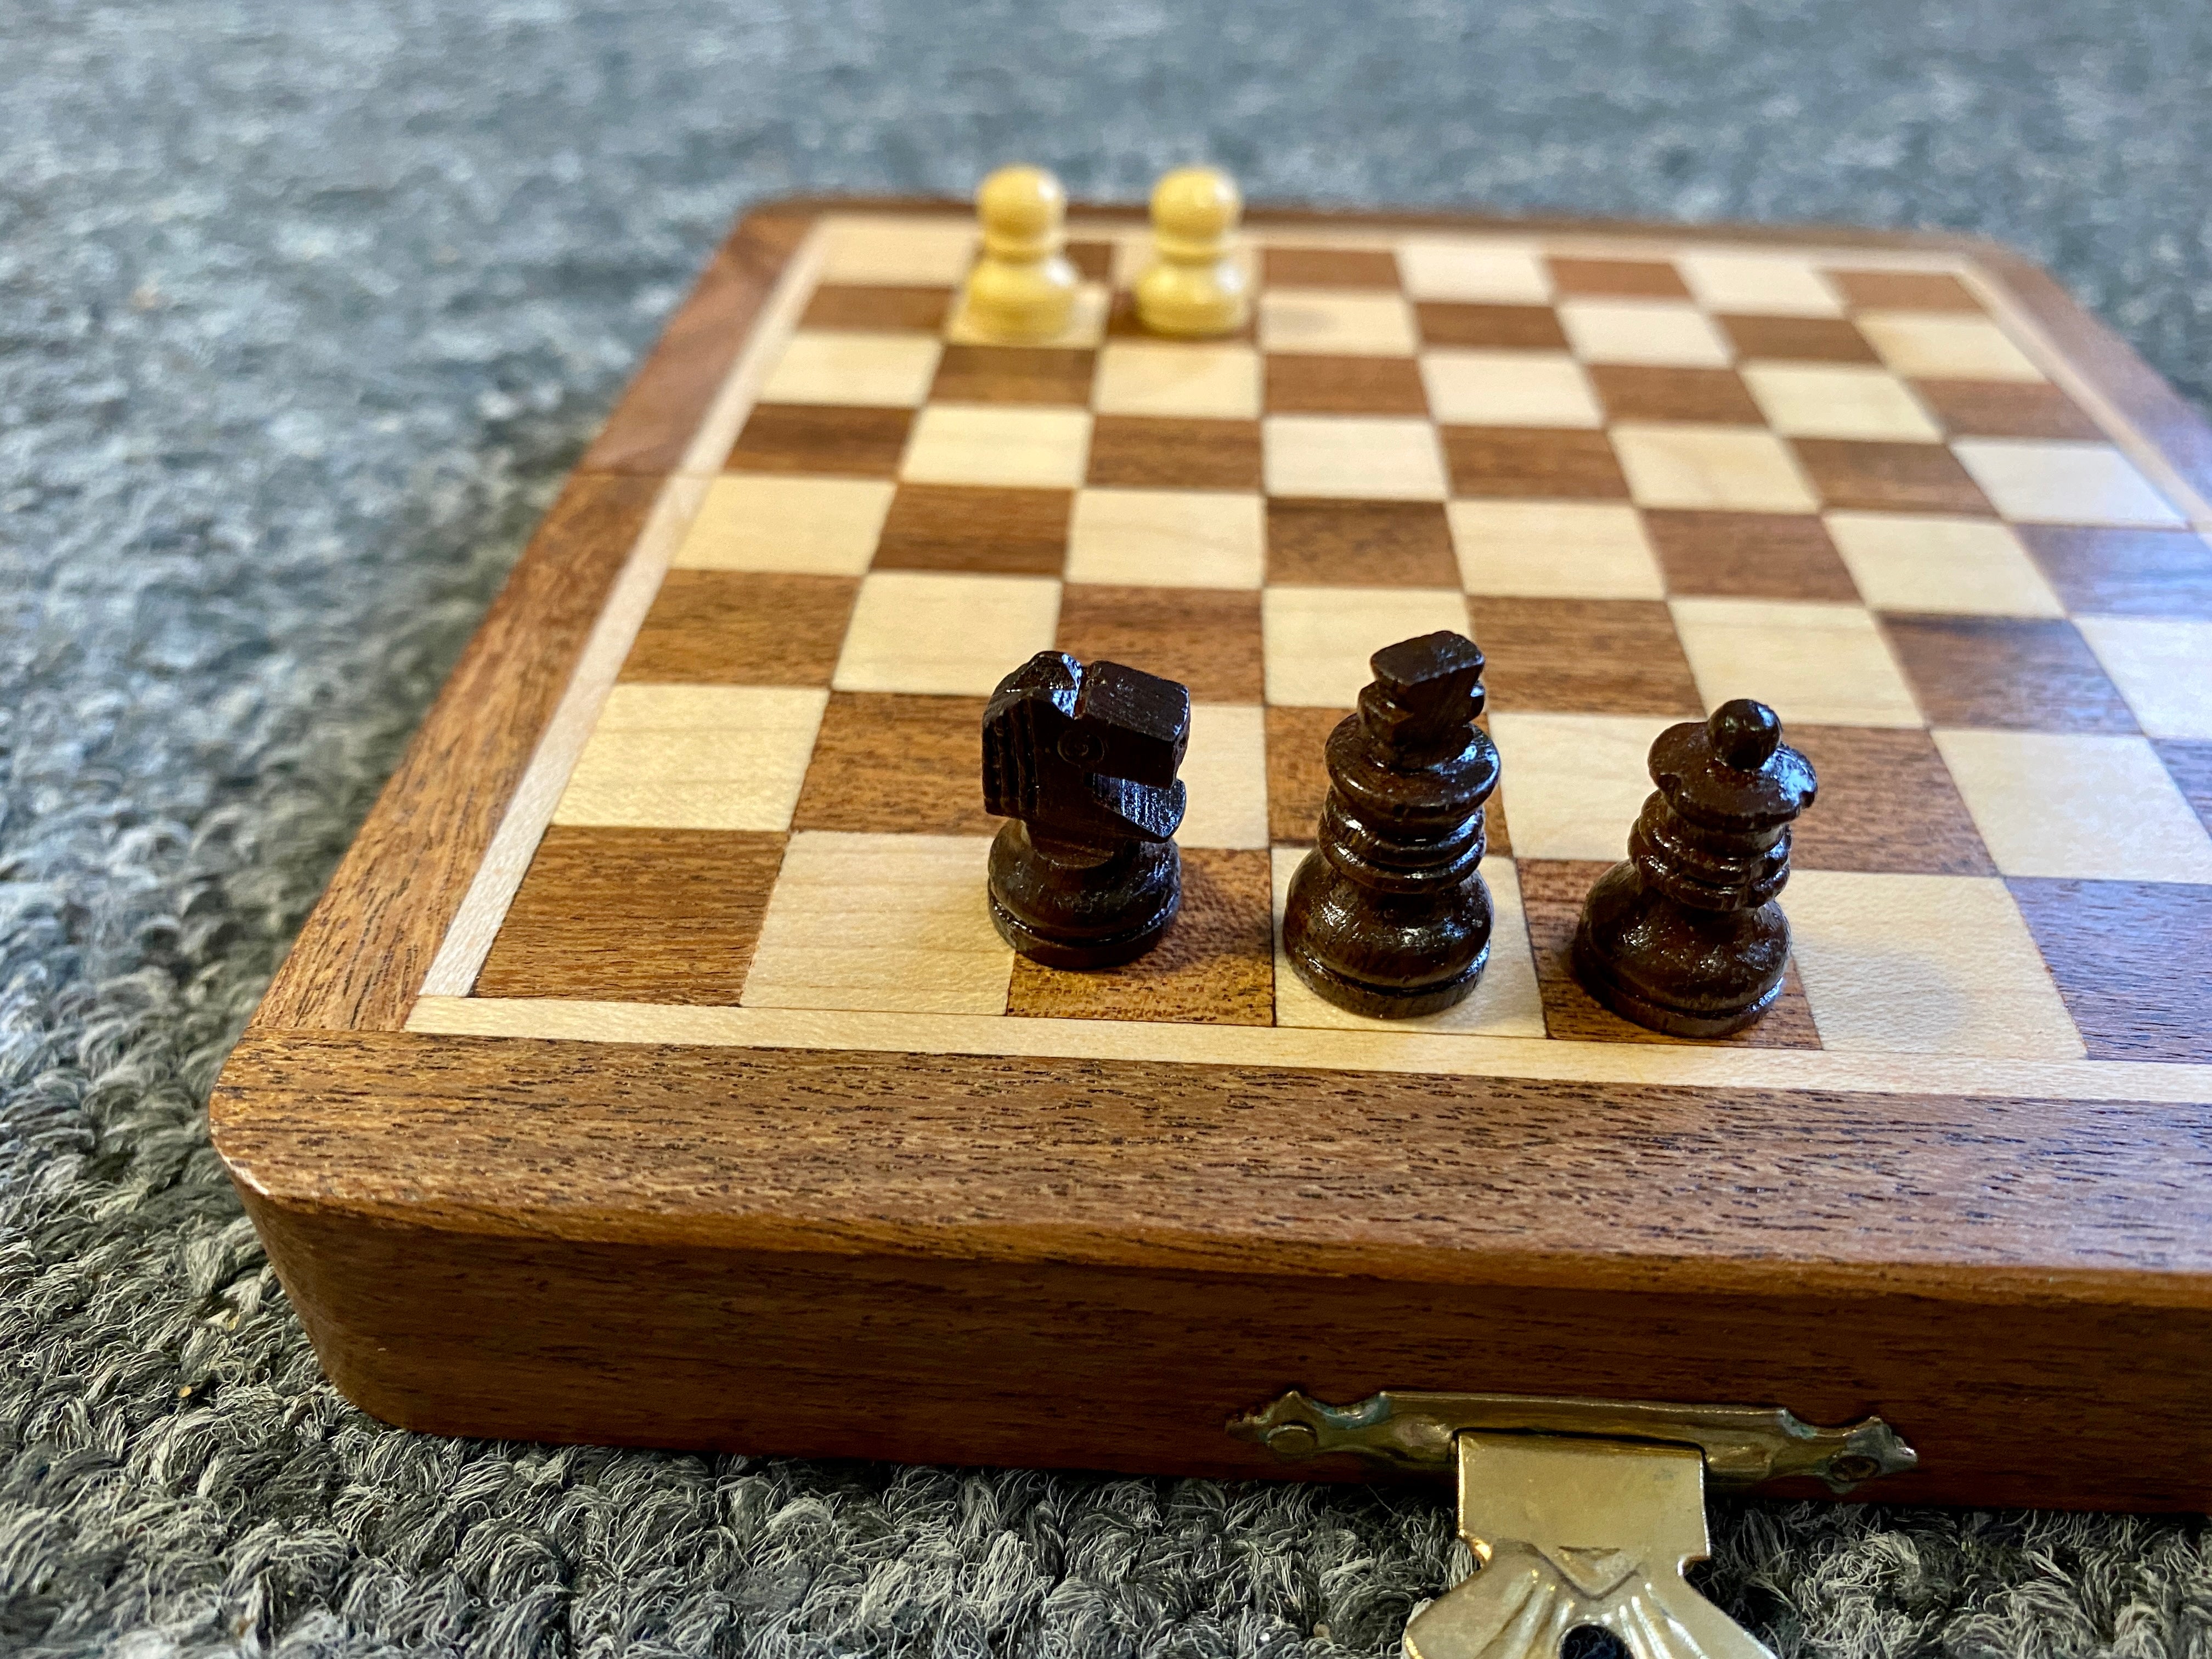 5 Cool Chess Sets - Chess Sets to Gift